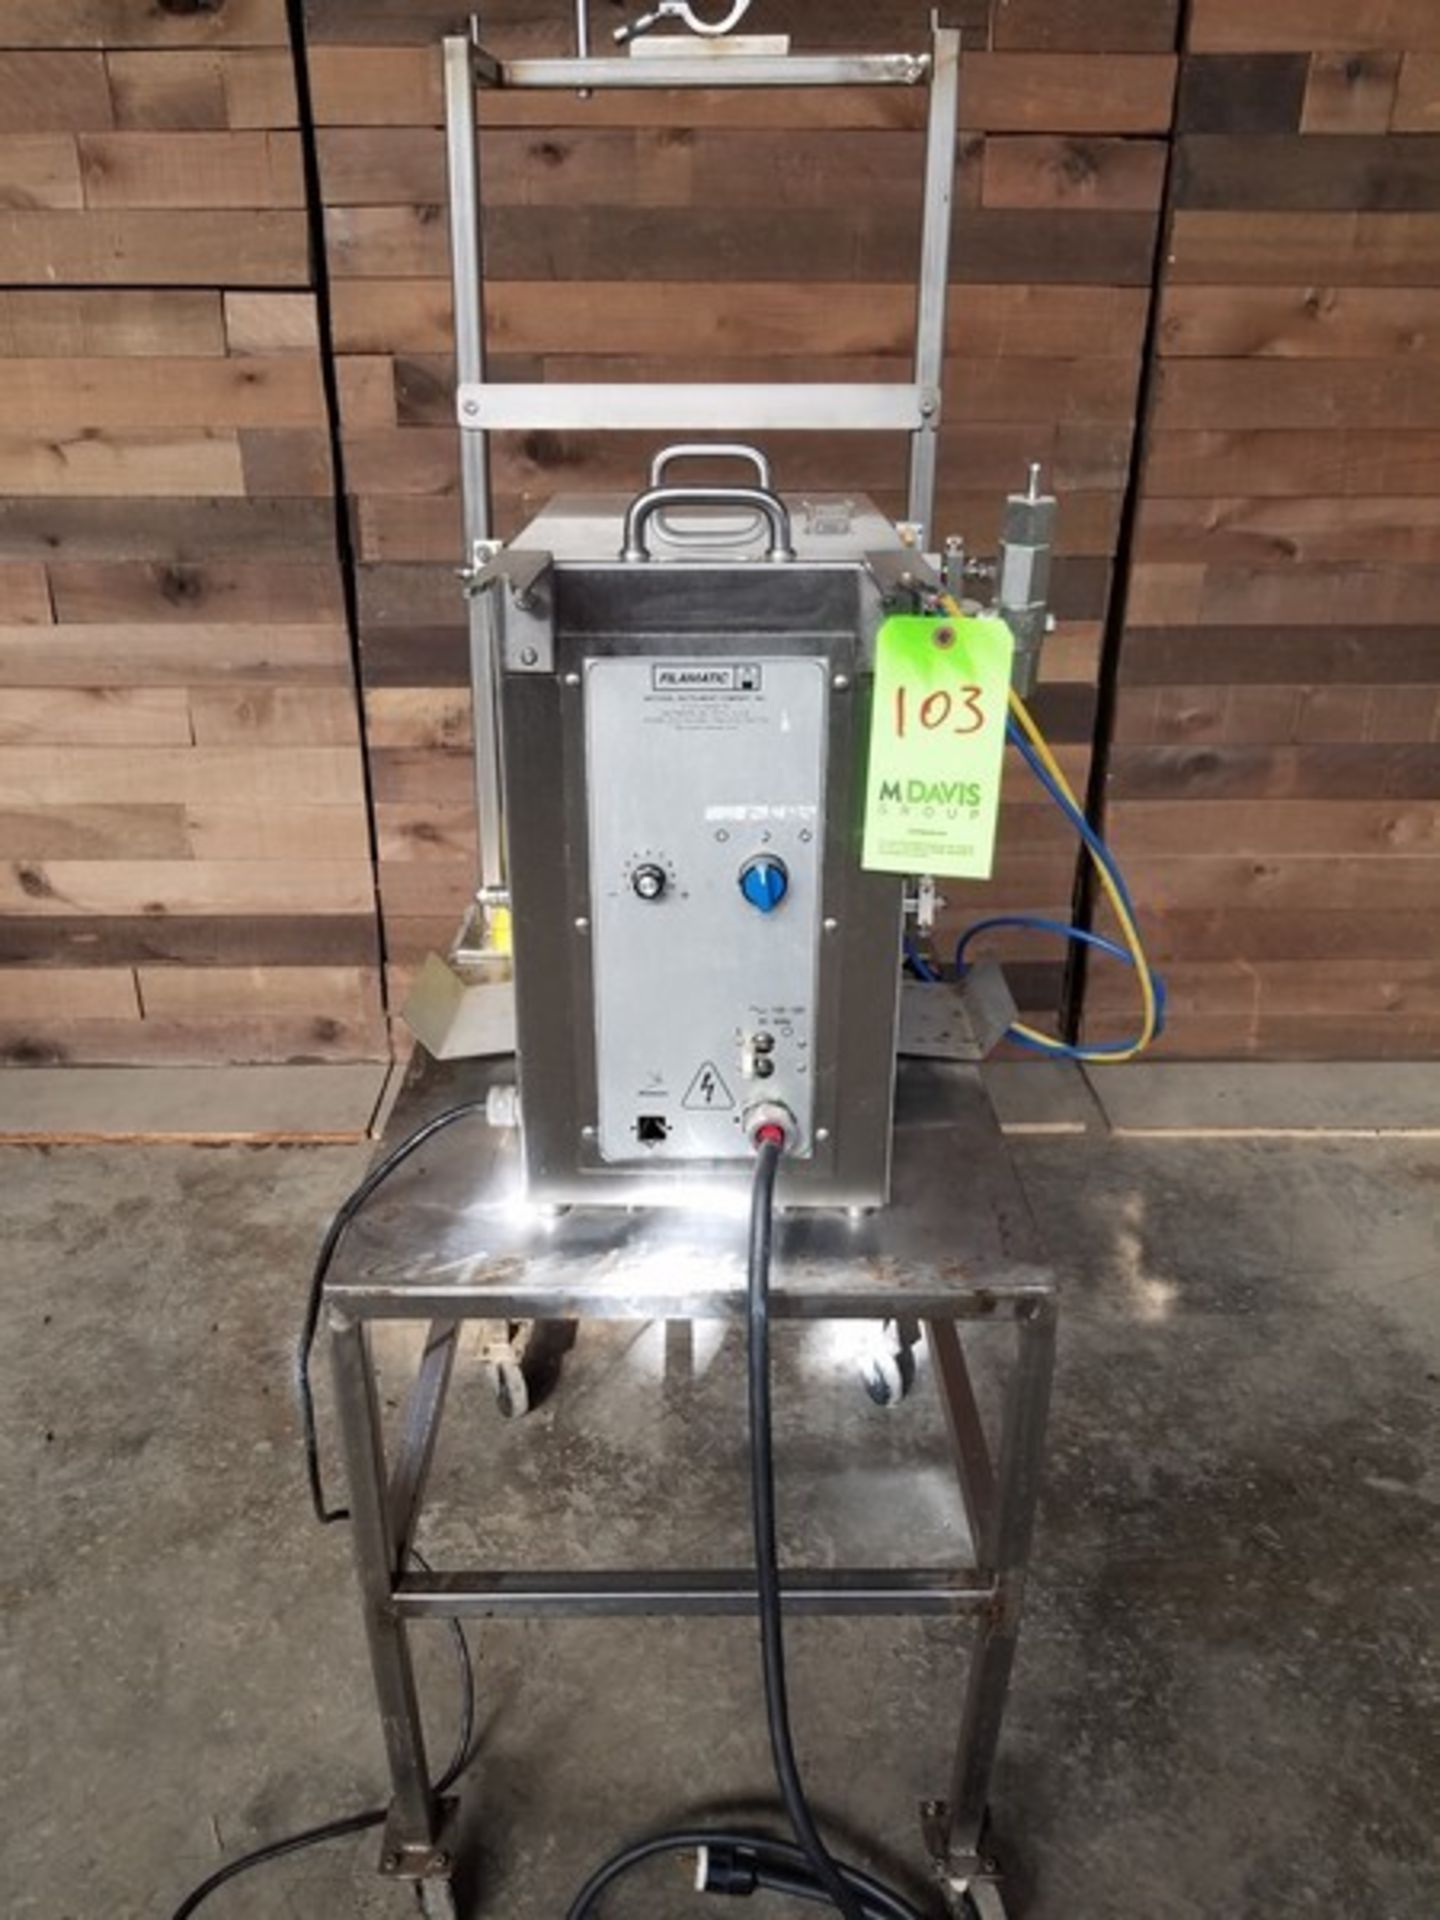 Filamatic DAB-8 Bottle Filler, S/N 021555, Volt 110, 2-Head with Extra Parts (Loading Fee $150)